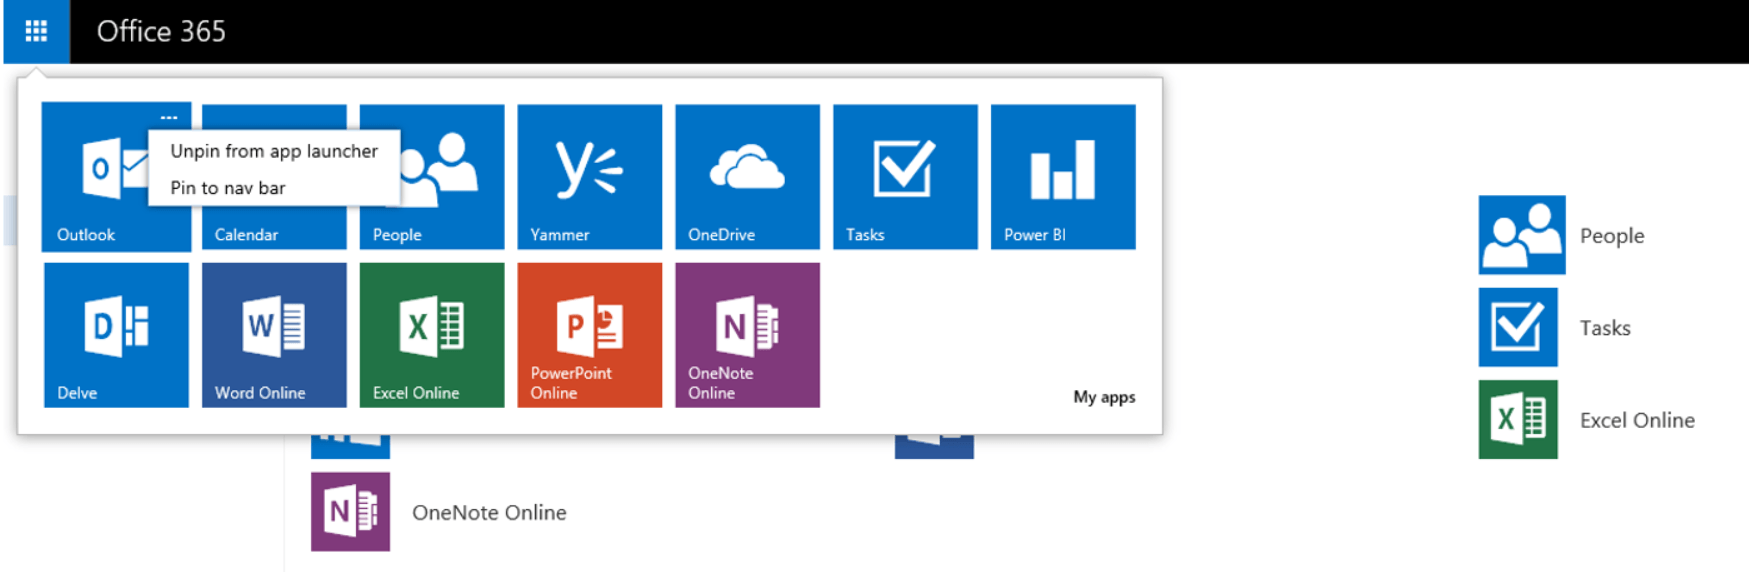 Microsoft Apps Logo - Organize your Office 365 with the new app launcher - Microsoft 365 Blog